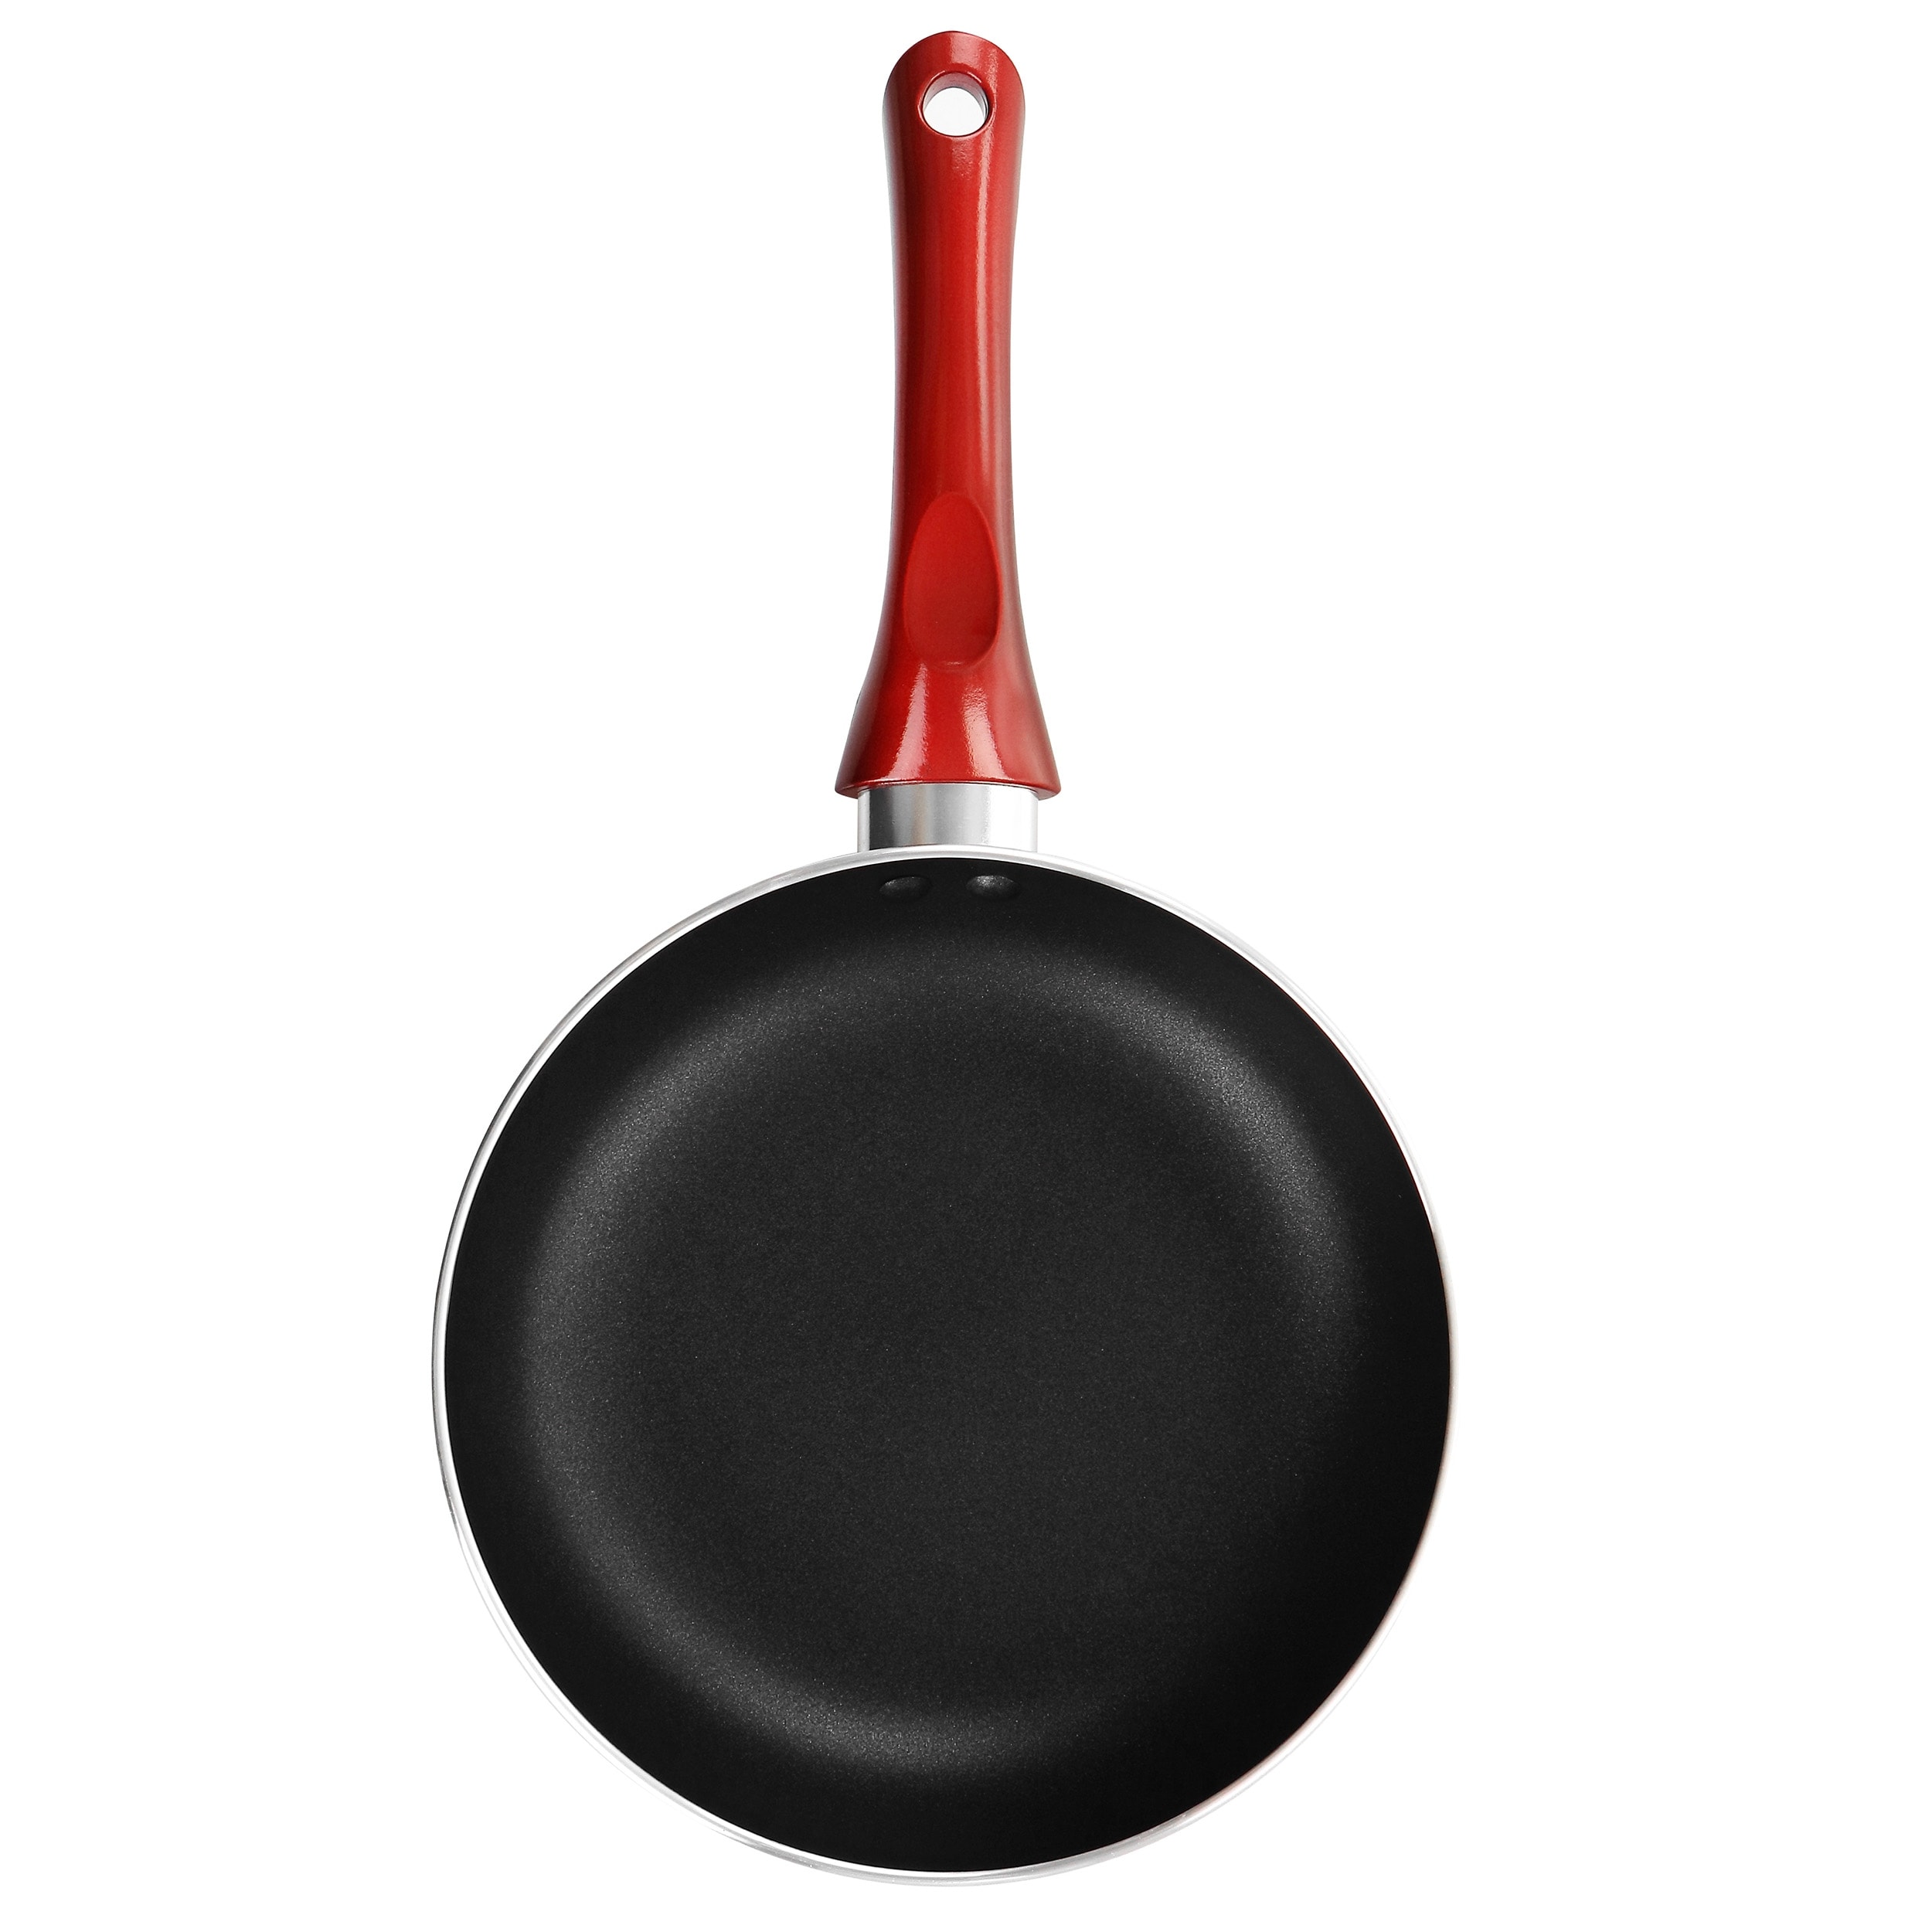 https://ak1.ostkcdn.com/images/products/is/images/direct/d99ca3cb033f1978e48286c7a4e38143c4292a71/8-Inch-Non-Stick-Gourmet-Fry-Pan-in-Scarlet.jpg